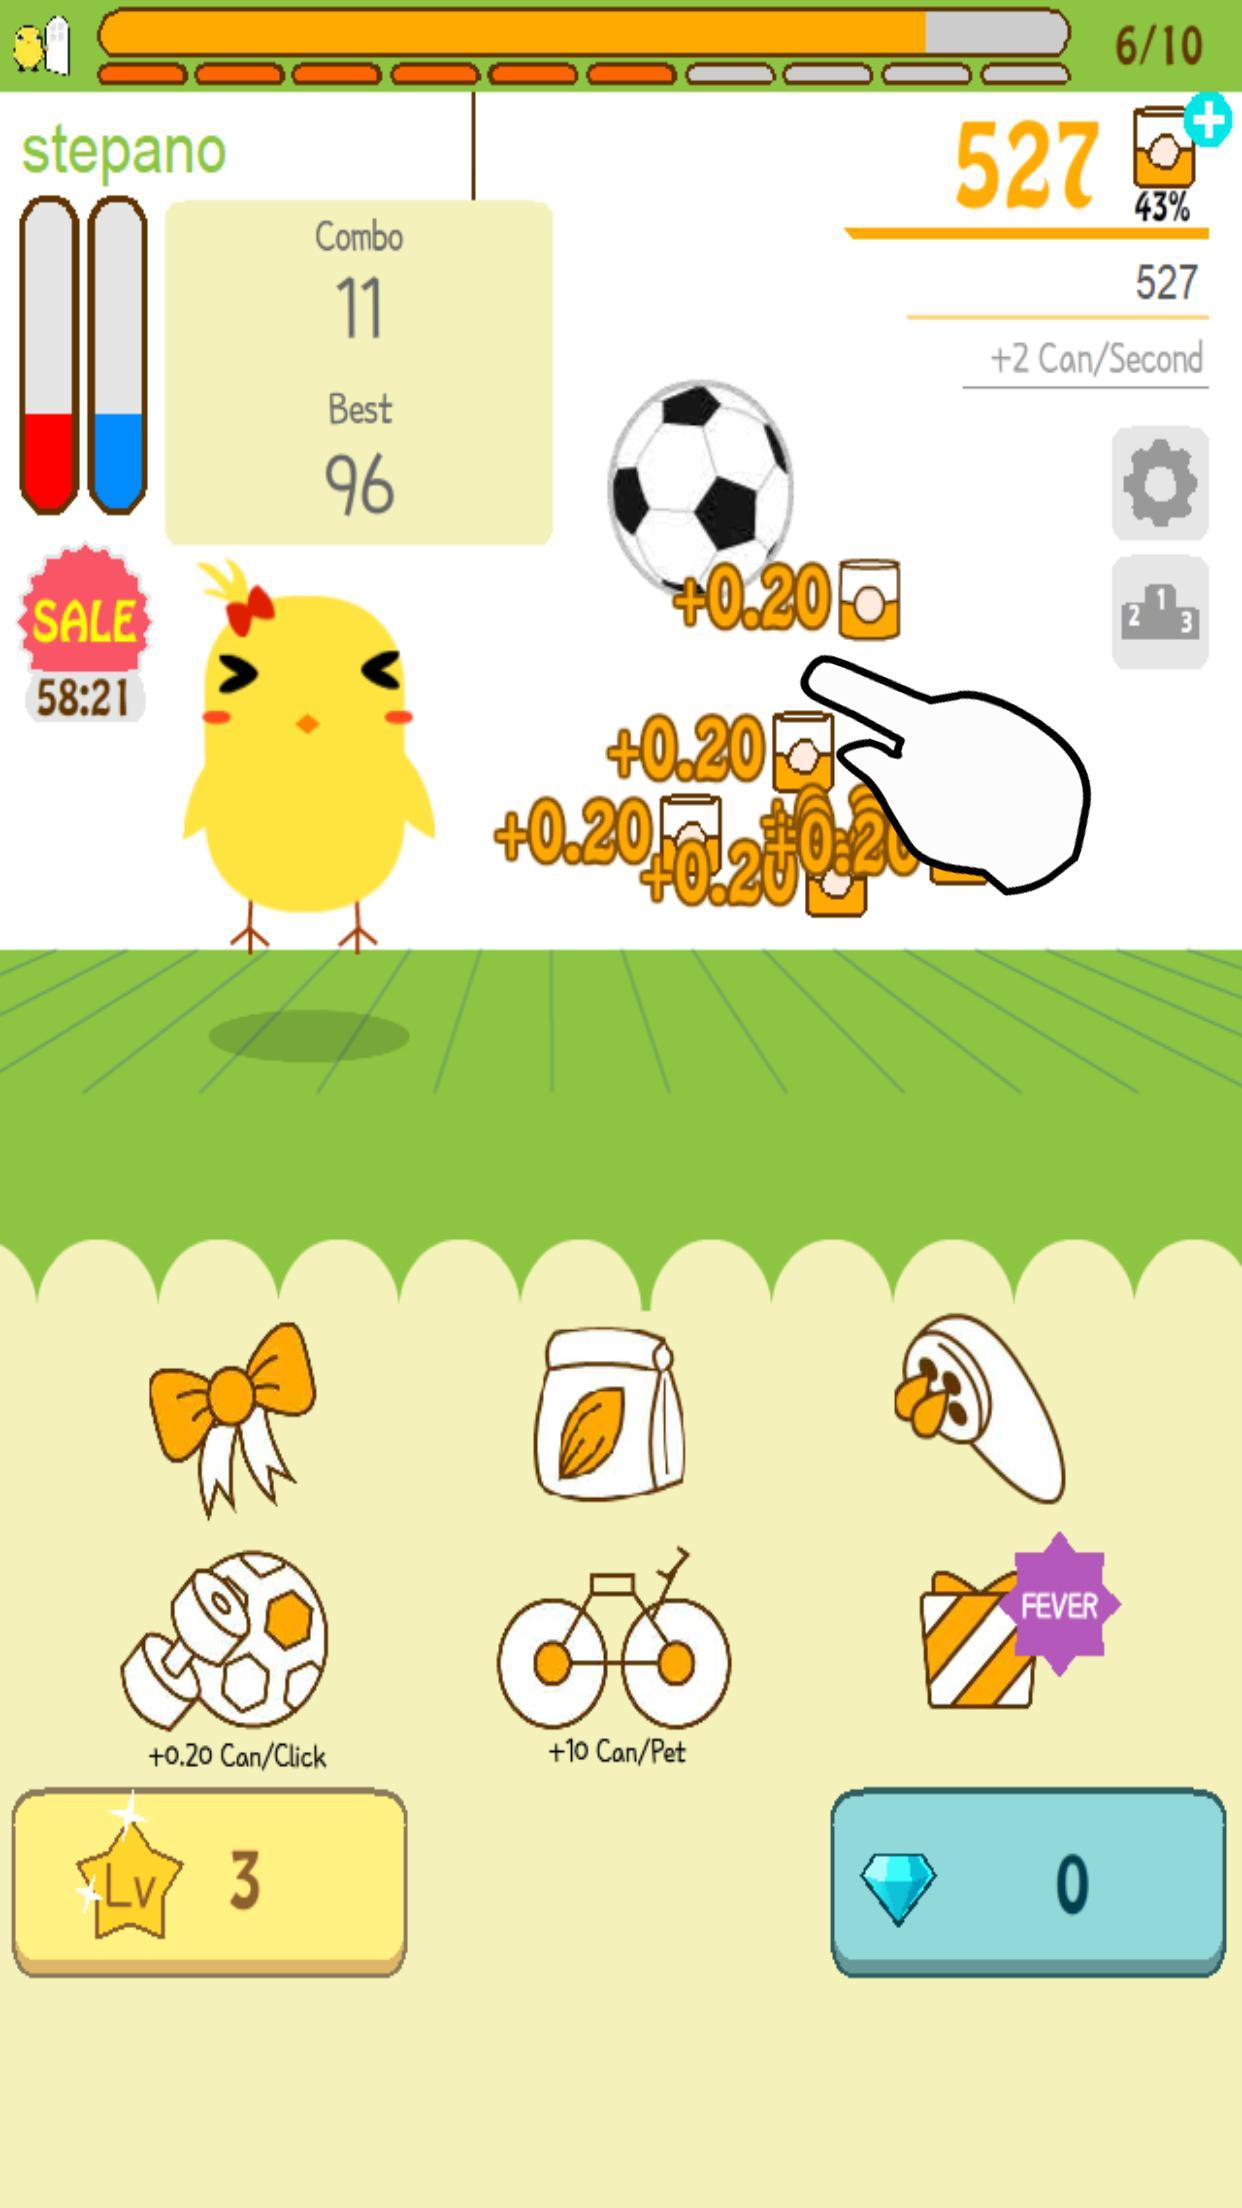 Can your pet 2. Цыпленок can your Pet. Can your Pet Classic игра. Велосипед can your Pet. Может ваш питомец.